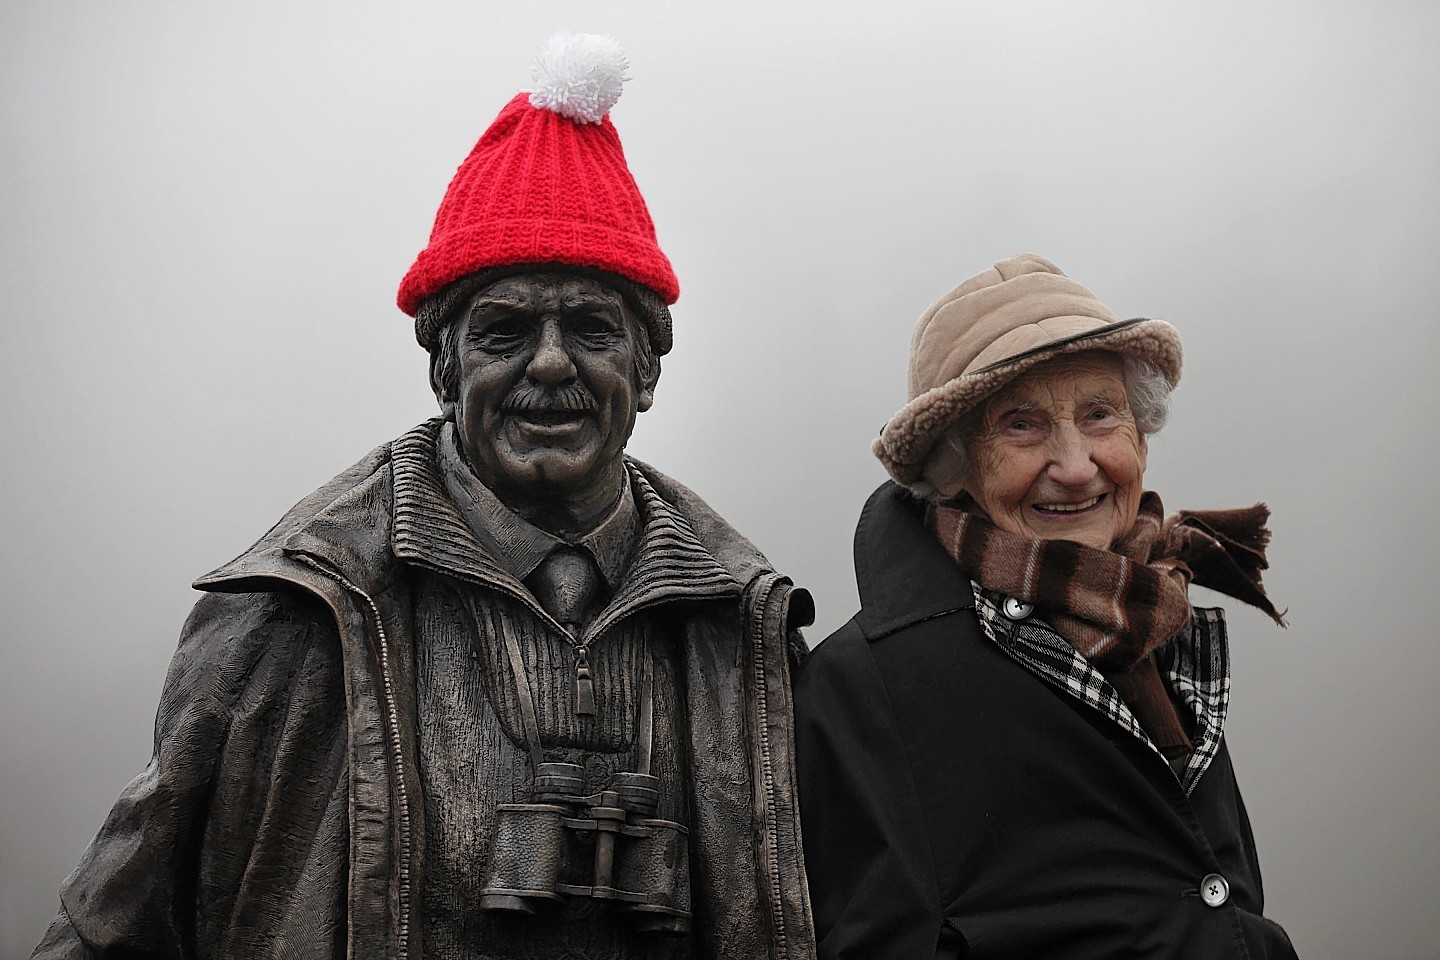 Countryside legend Tom Weir is honoured with a statue at Balmaha, Loch Lomond, unveiled by his wife Rhona